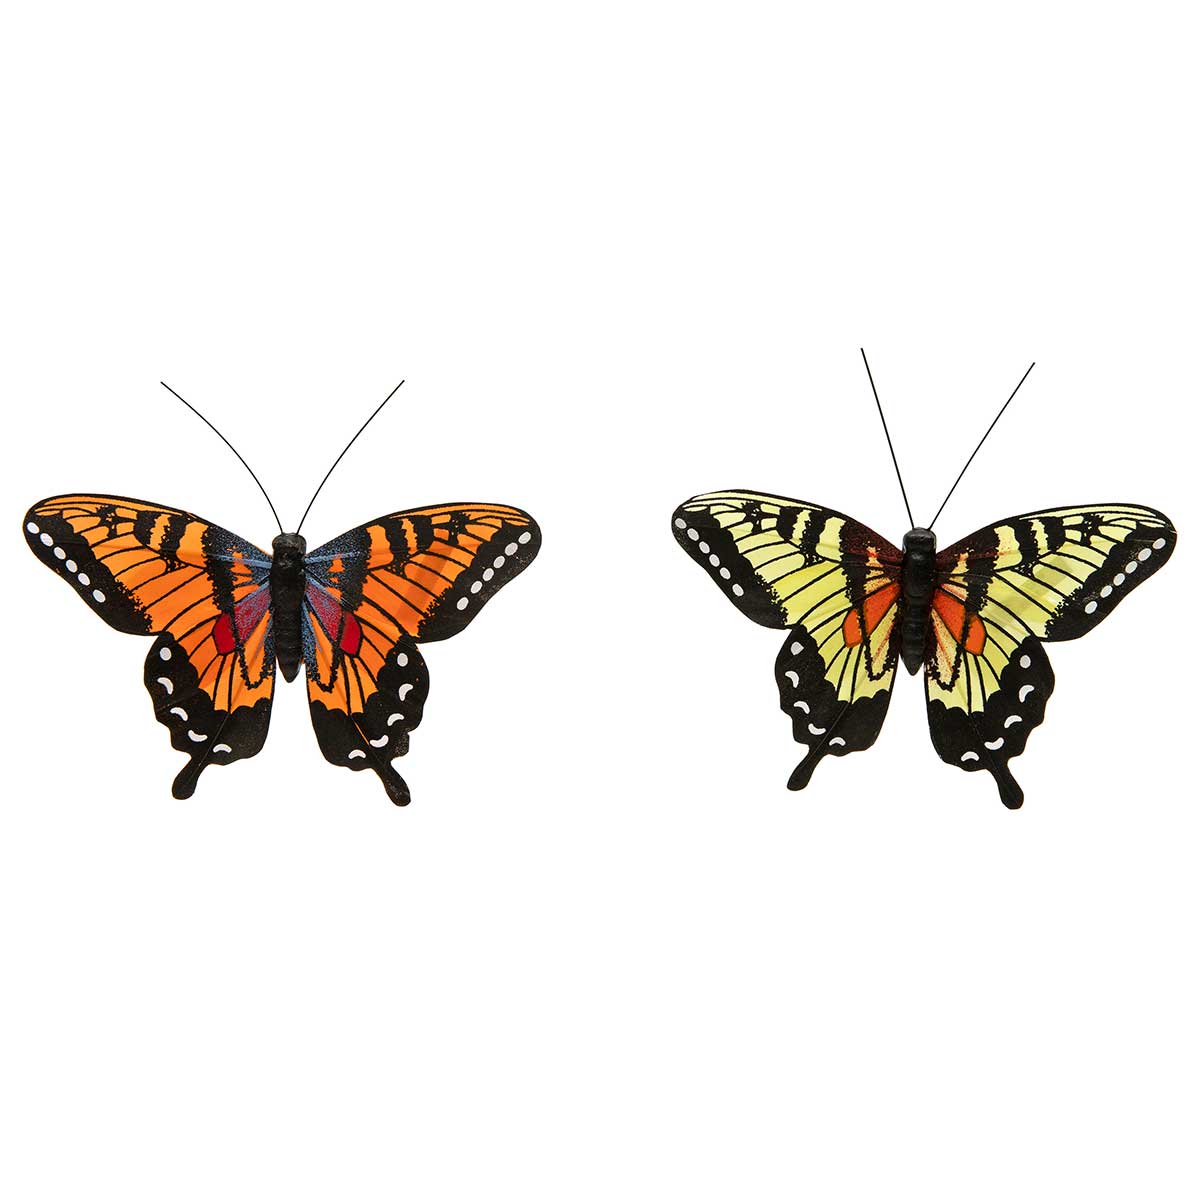 BUTTERFLY 2 ASSORTED YE/OR LARGE 5IN X 5.5IN ON METAL CLIP